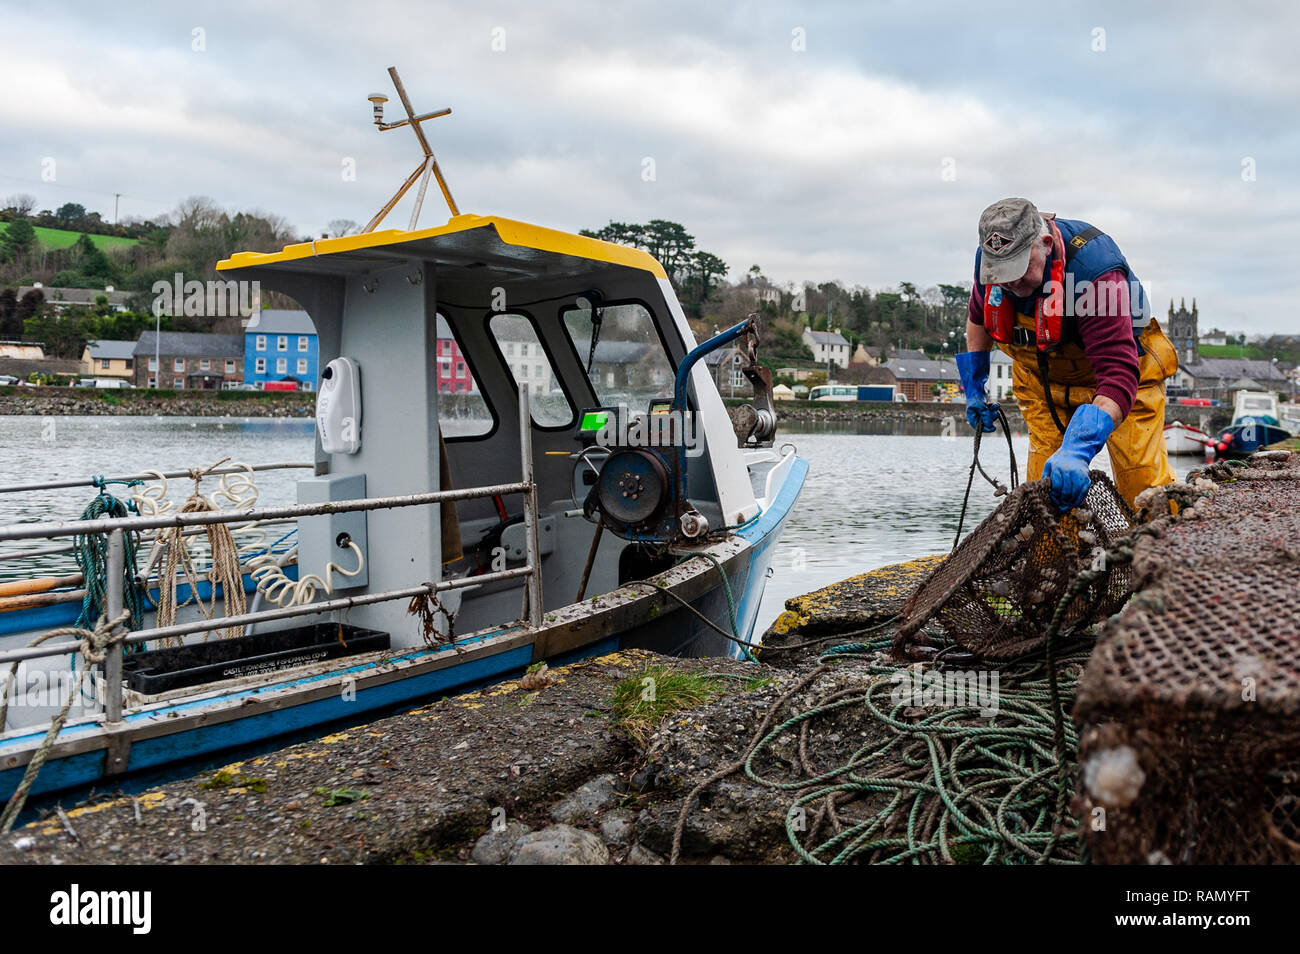 Bantry, West Cork, Ireland. 4th January, 2019. A fisherman unloads his crab pots after a fishing trip in Bantry Bay. Credit: Andy Gibson/Alamy Live News. Stock Photo